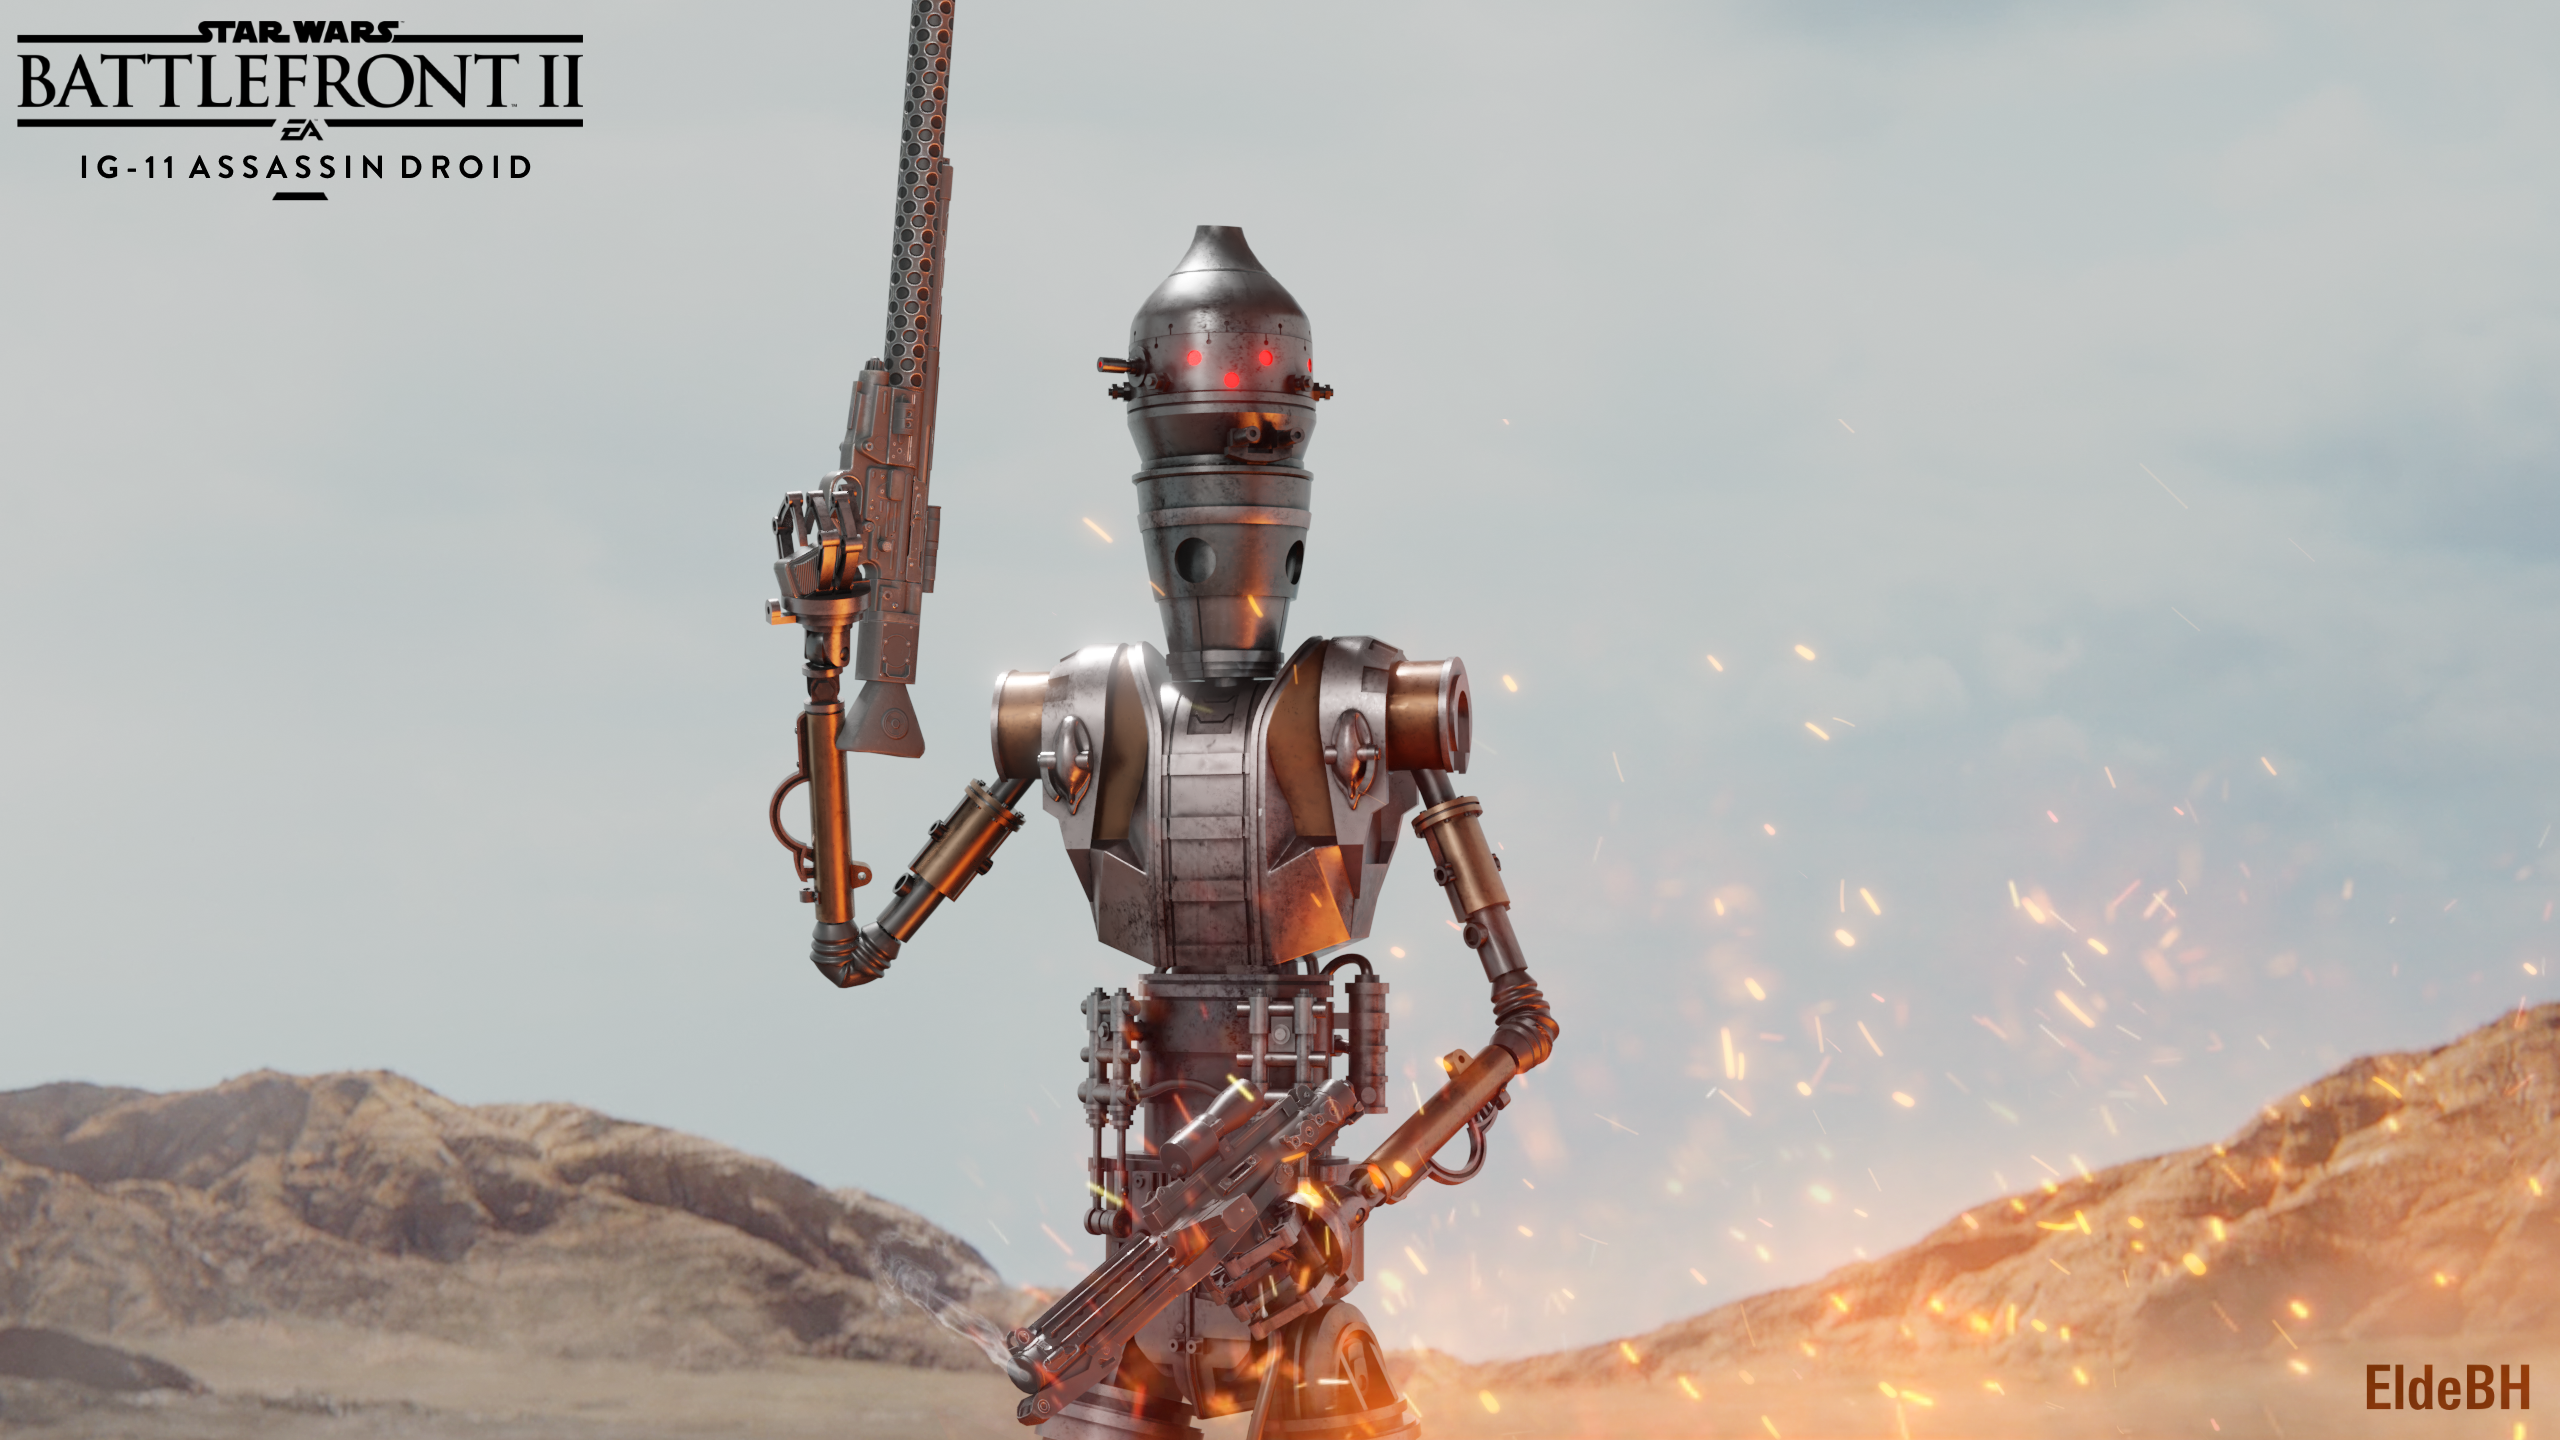 IG 11 Assassin Droid At Star Wars: Battlefront II (2017) Nexus And Community